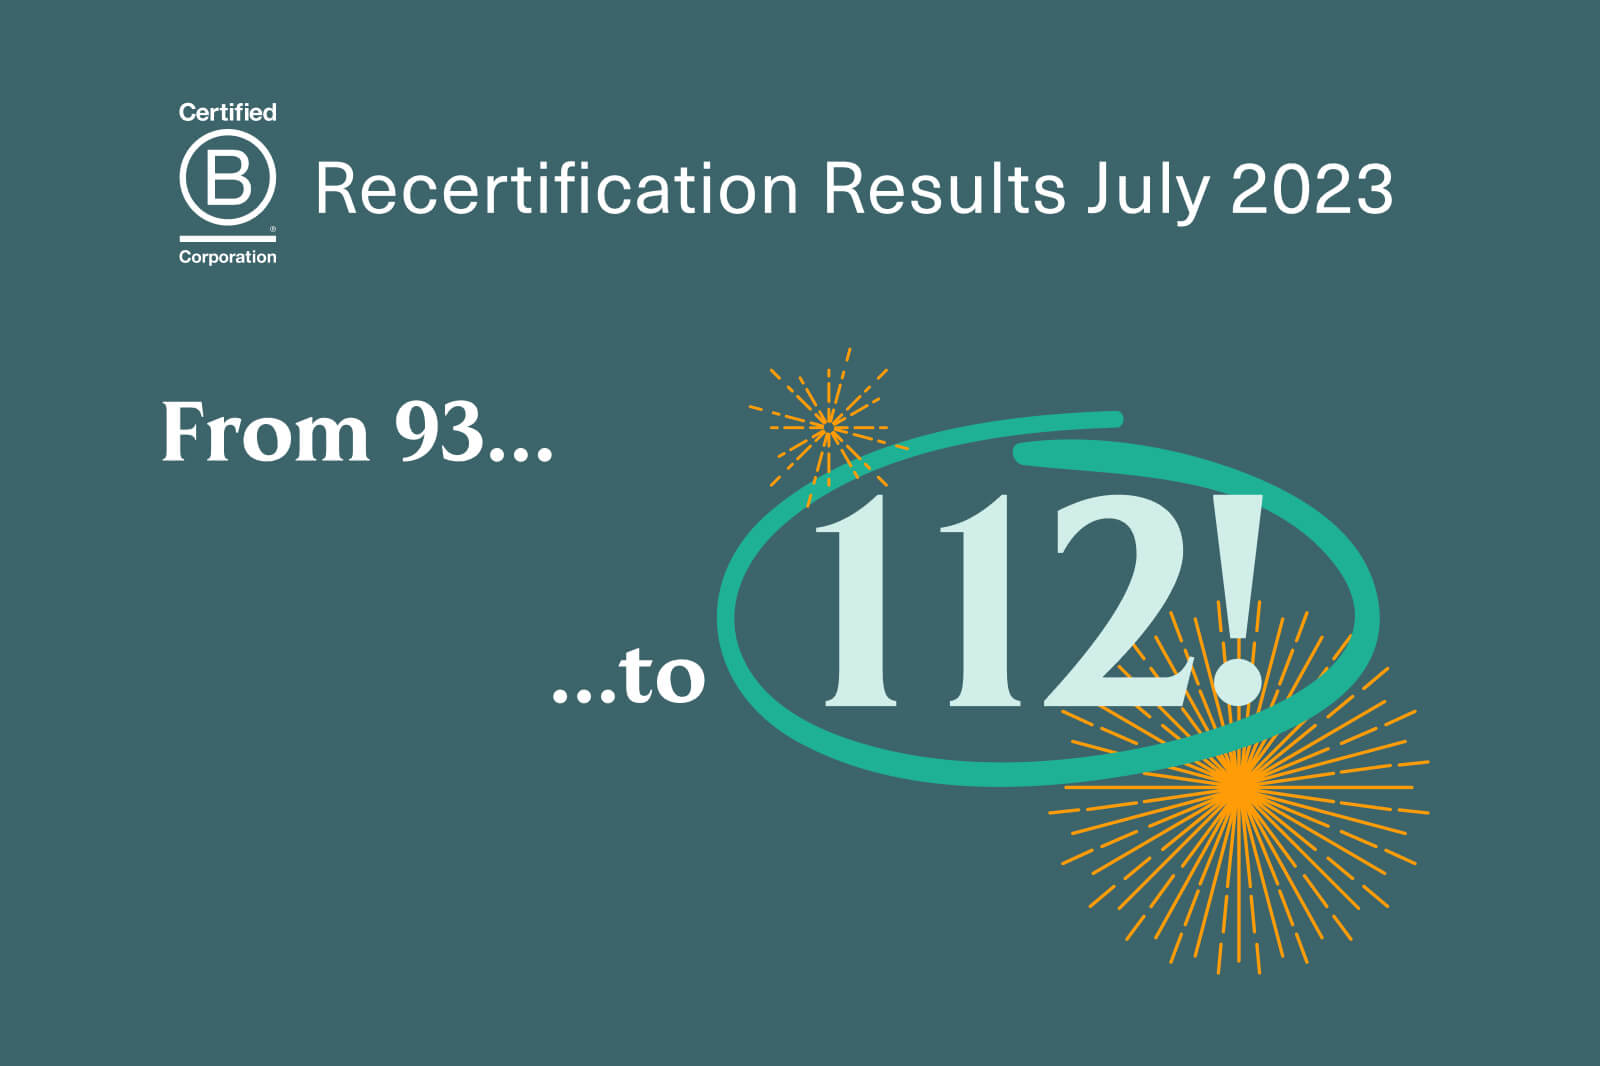 Decorative image with exuberant text: Recertification Results July 2023: From 93 to 112!